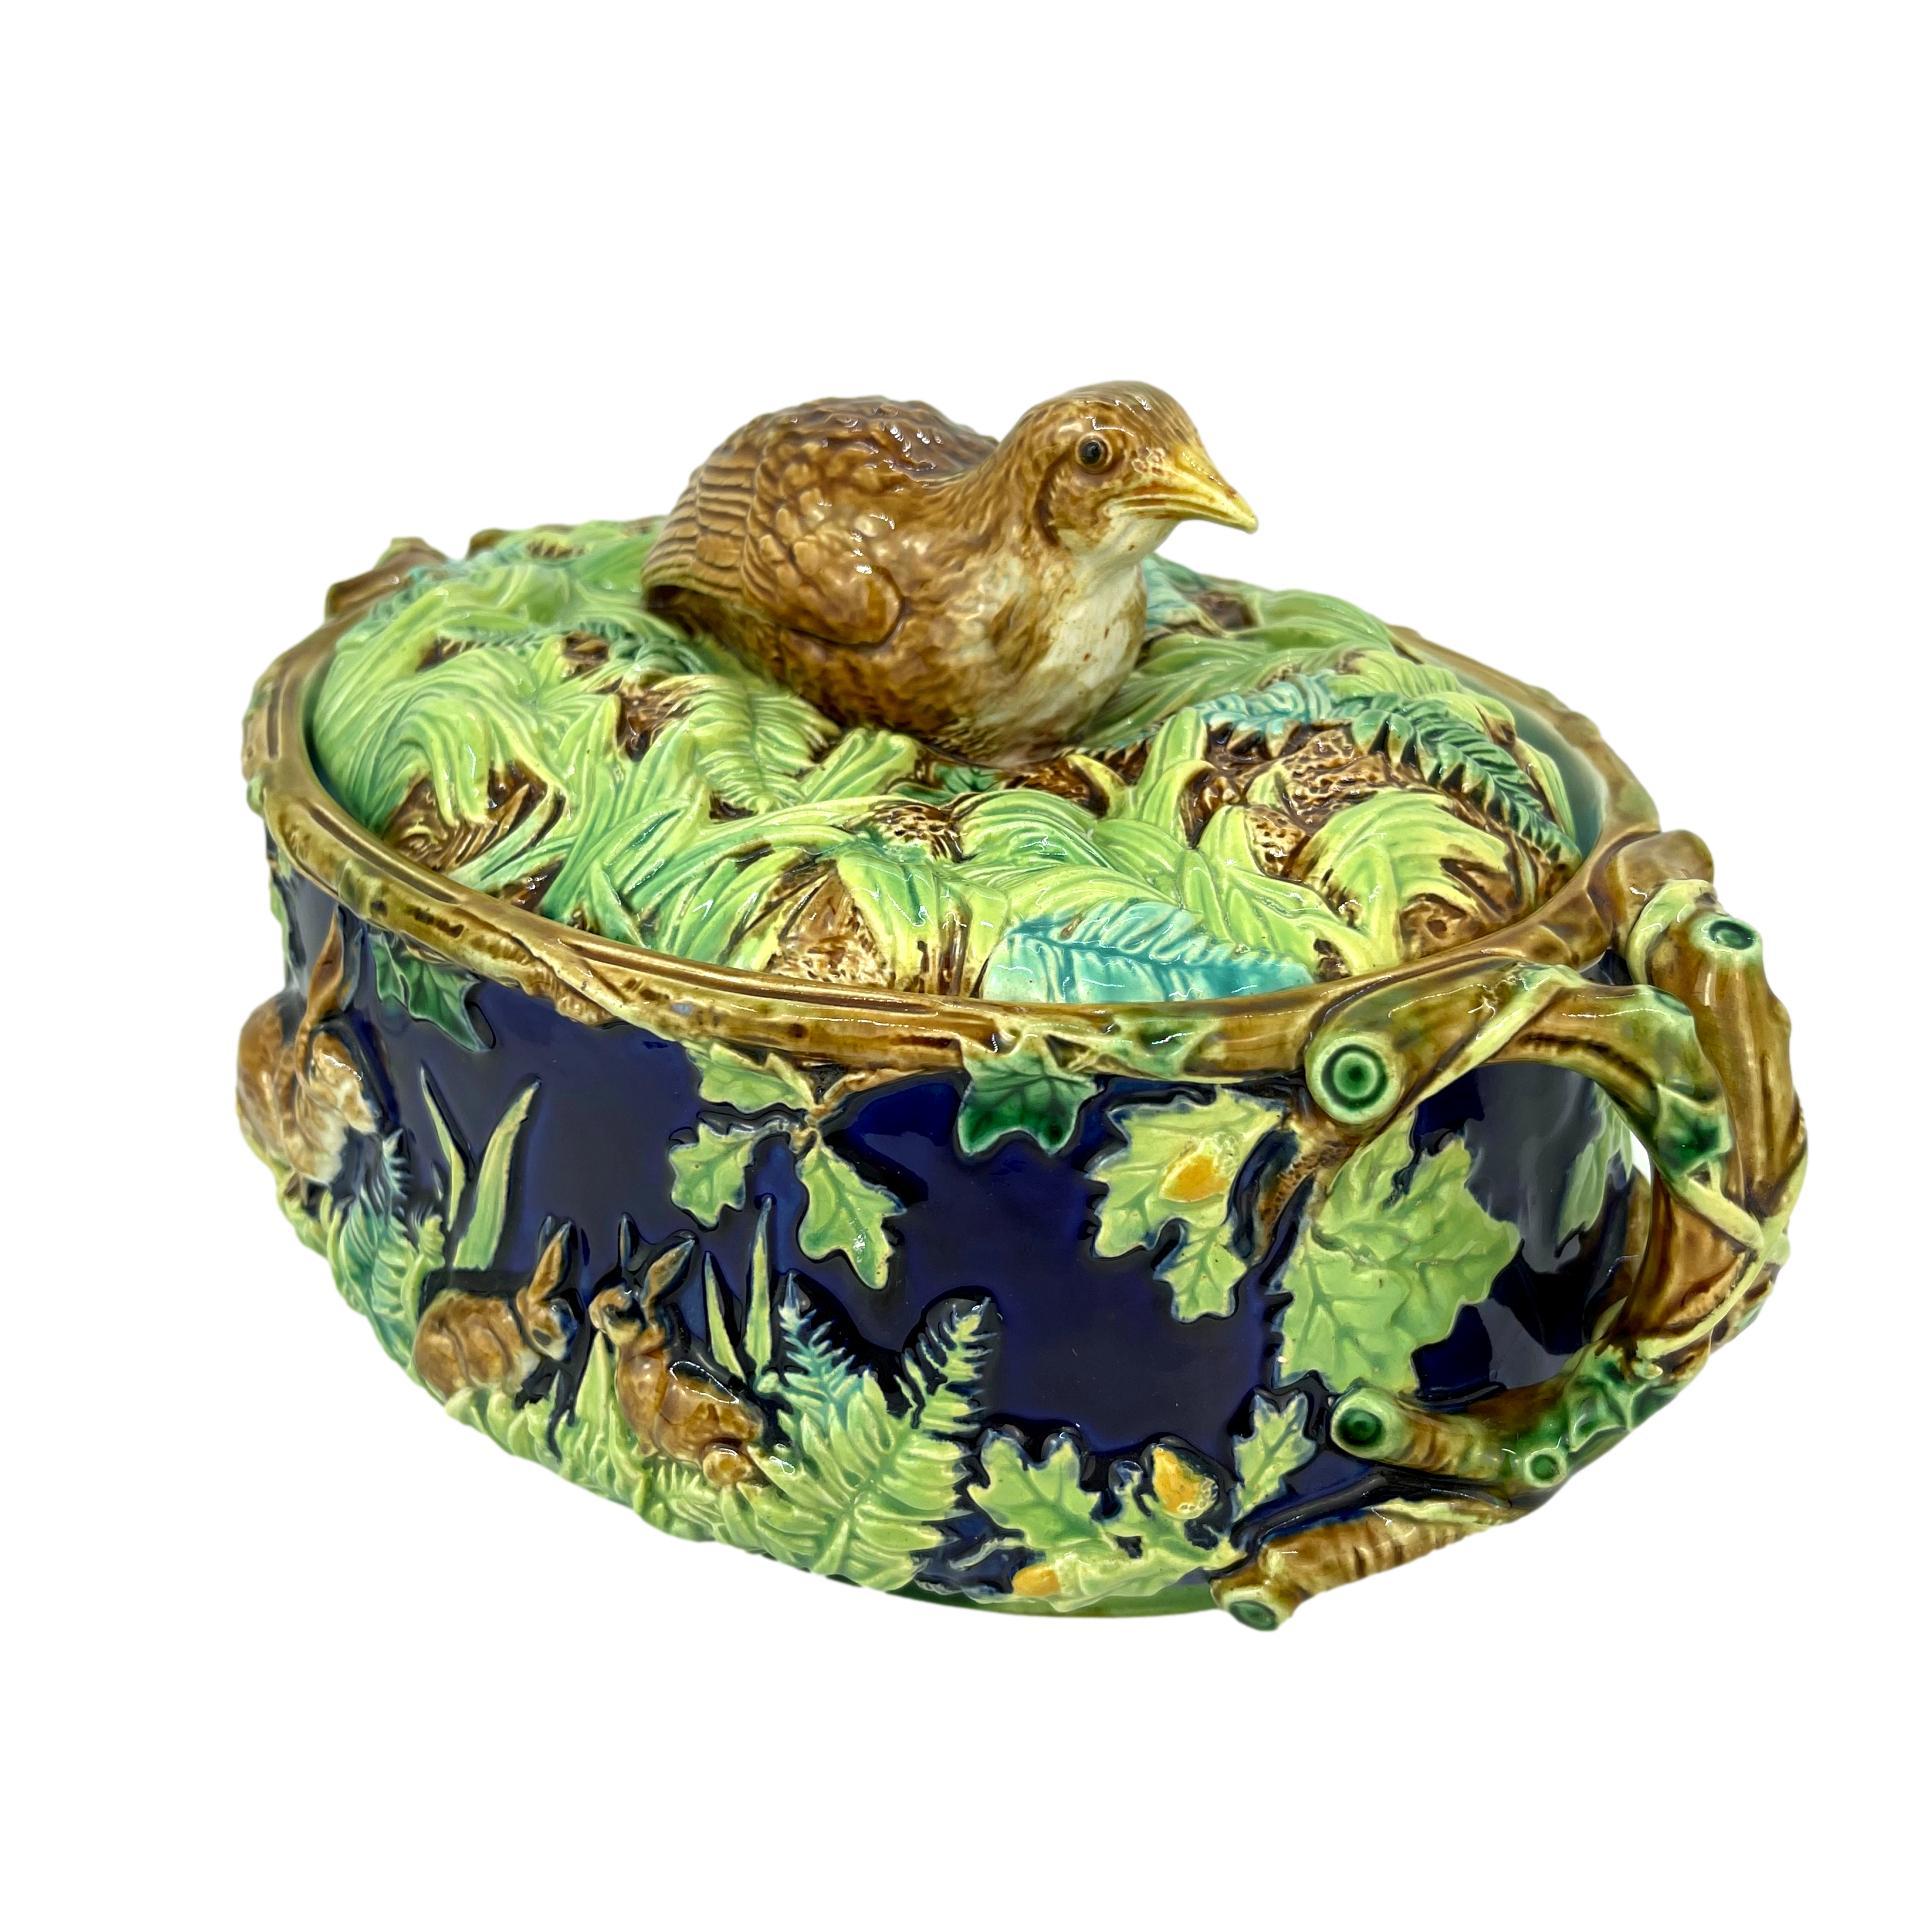 Molded George Jones Majolica Partridge Tureen with Rabbits and Ferns in Cobalt, 1877